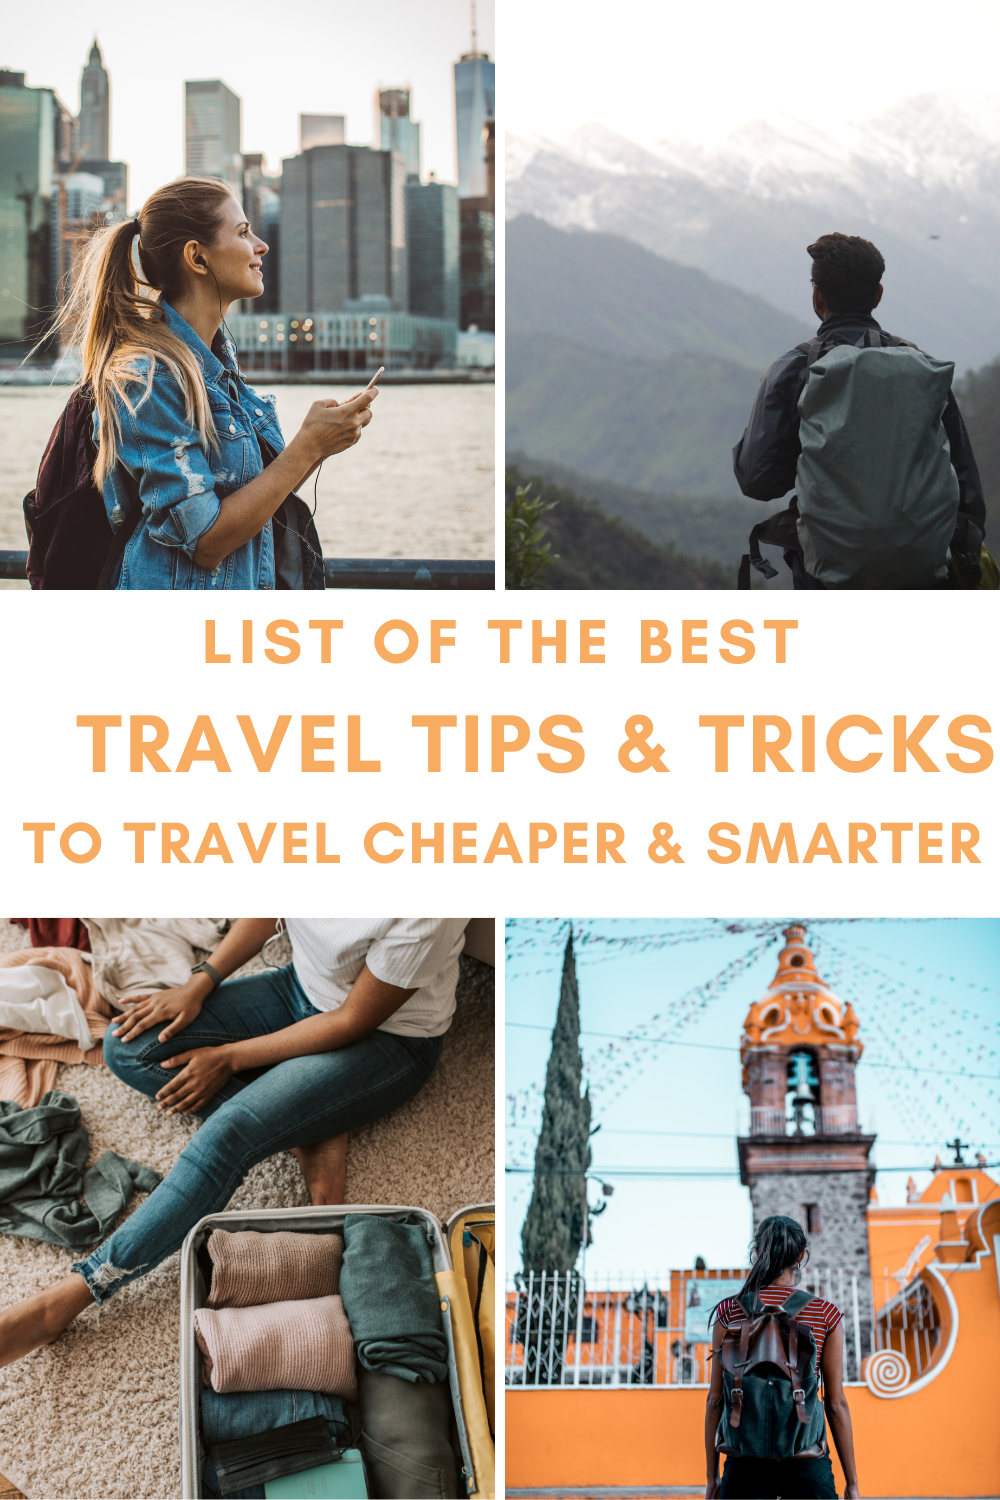 We’ve come up with an ultimate list of the best travel tips and tricks that will help you become a savvy traveller even if this is your first trip!